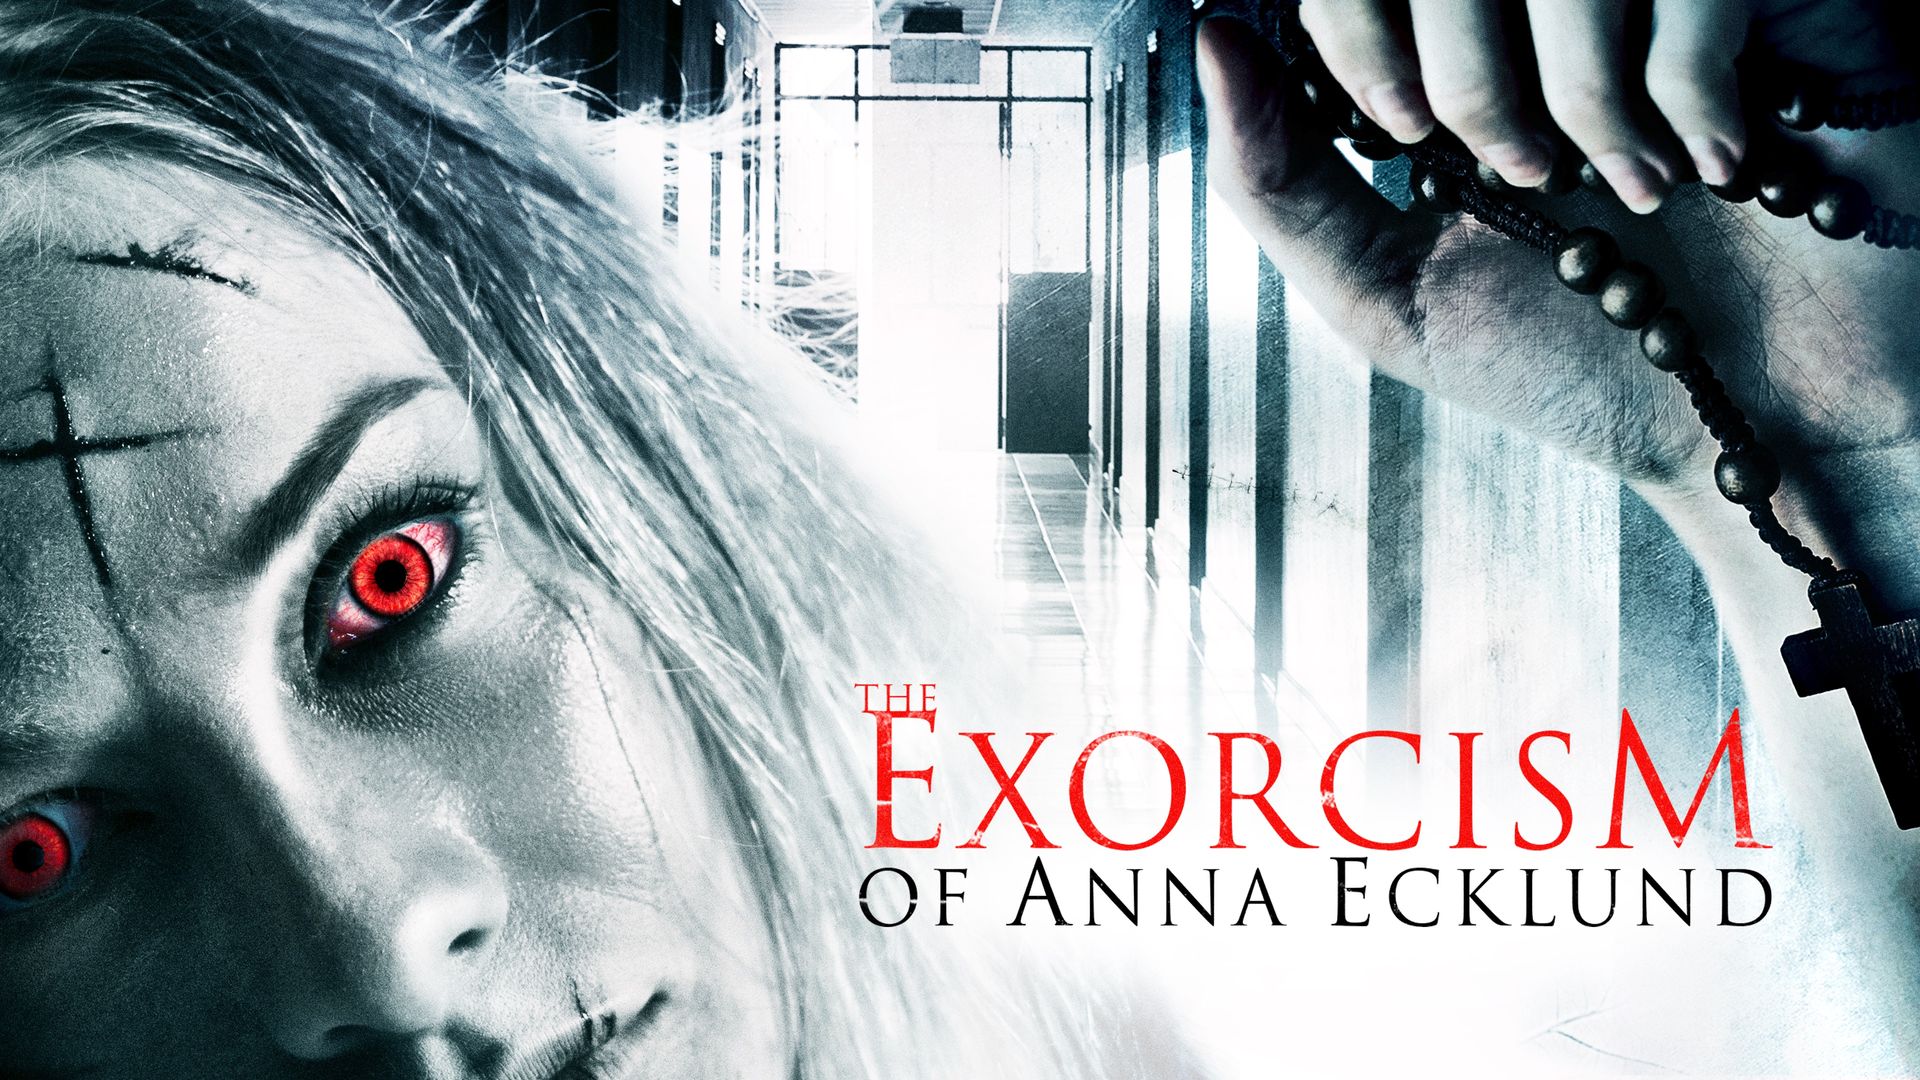 The Exorcism of Anna Ecklund Backdrop